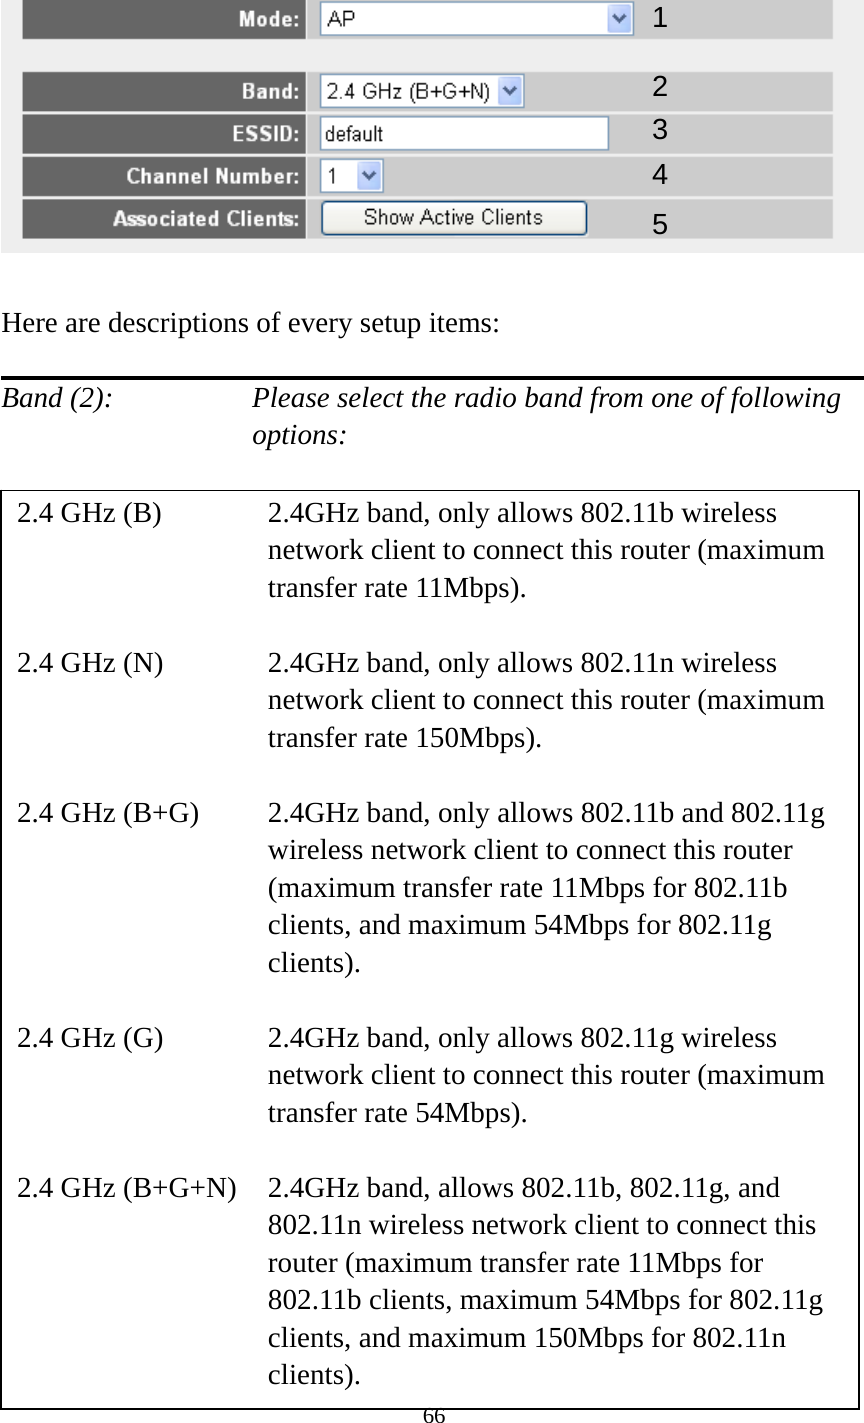 66    Here are descriptions of every setup items:  Band (2):    Please select the radio band from one of following options:                         12 34 2.4 GHz (B)  2.4GHz band, only allows 802.11b wireless network client to connect this router (maximum transfer rate 11Mbps).  2.4 GHz (N)  2.4GHz band, only allows 802.11n wireless network client to connect this router (maximum transfer rate 150Mbps).  2.4 GHz (B+G)    2.4GHz band, only allows 802.11b and 802.11g wireless network client to connect this router (maximum transfer rate 11Mbps for 802.11b clients, and maximum 54Mbps for 802.11g clients).  2.4 GHz (G)    2.4GHz band, only allows 802.11g wireless network client to connect this router (maximum transfer rate 54Mbps).  2.4 GHz (B+G+N)    2.4GHz band, allows 802.11b, 802.11g, and 802.11n wireless network client to connect this router (maximum transfer rate 11Mbps for 802.11b clients, maximum 54Mbps for 802.11g clients, and maximum 150Mbps for 802.11n clients). 5 